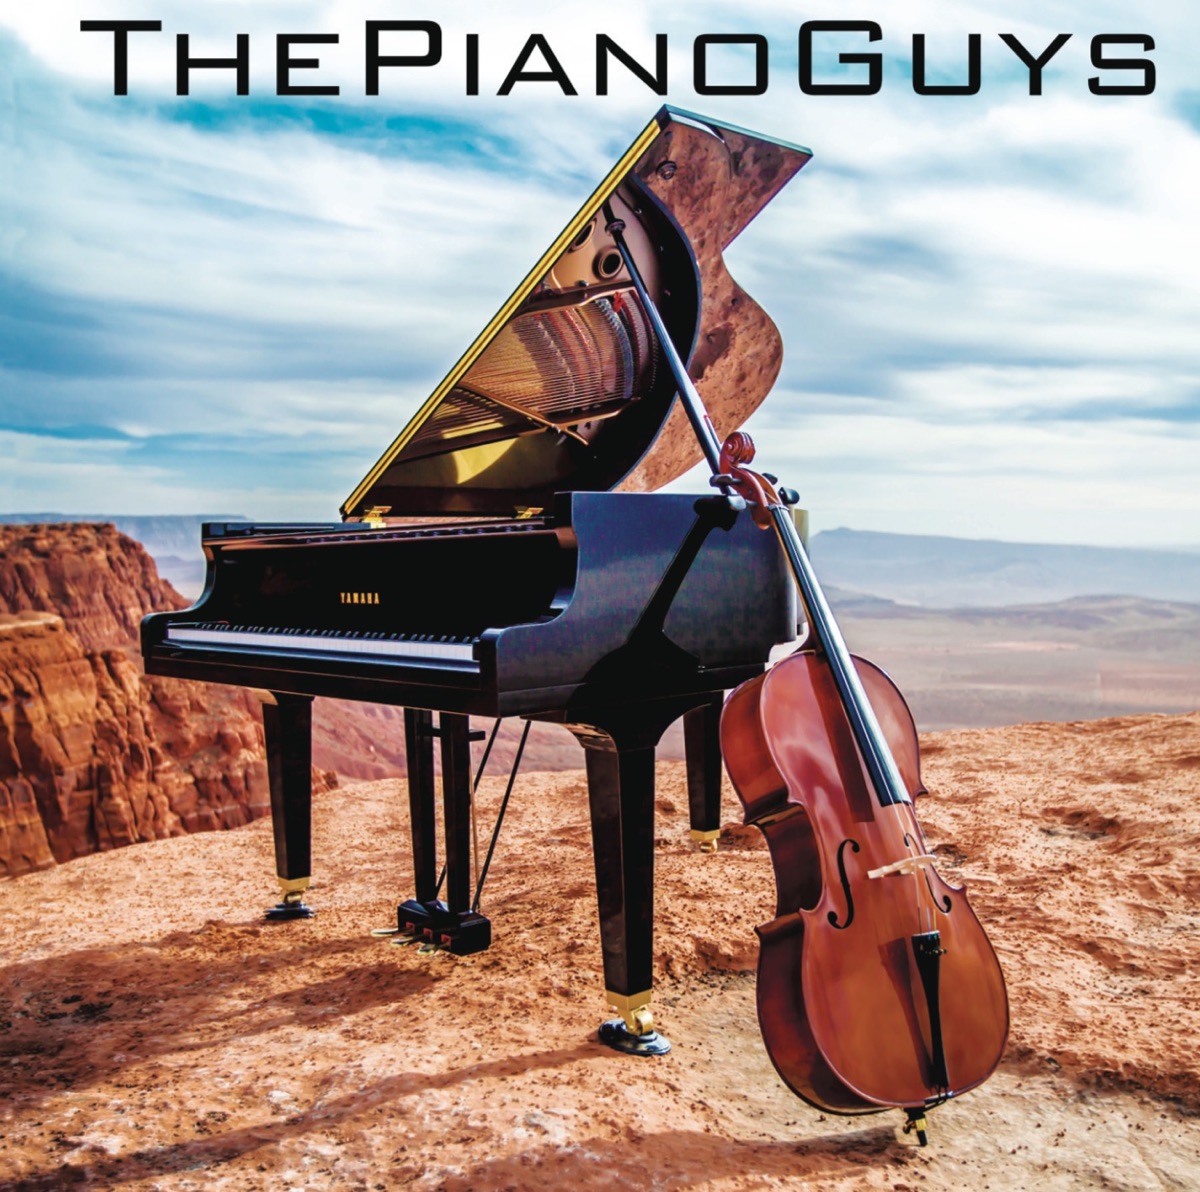 The Piano Guys 2 by The Piano Guys on Apple Music